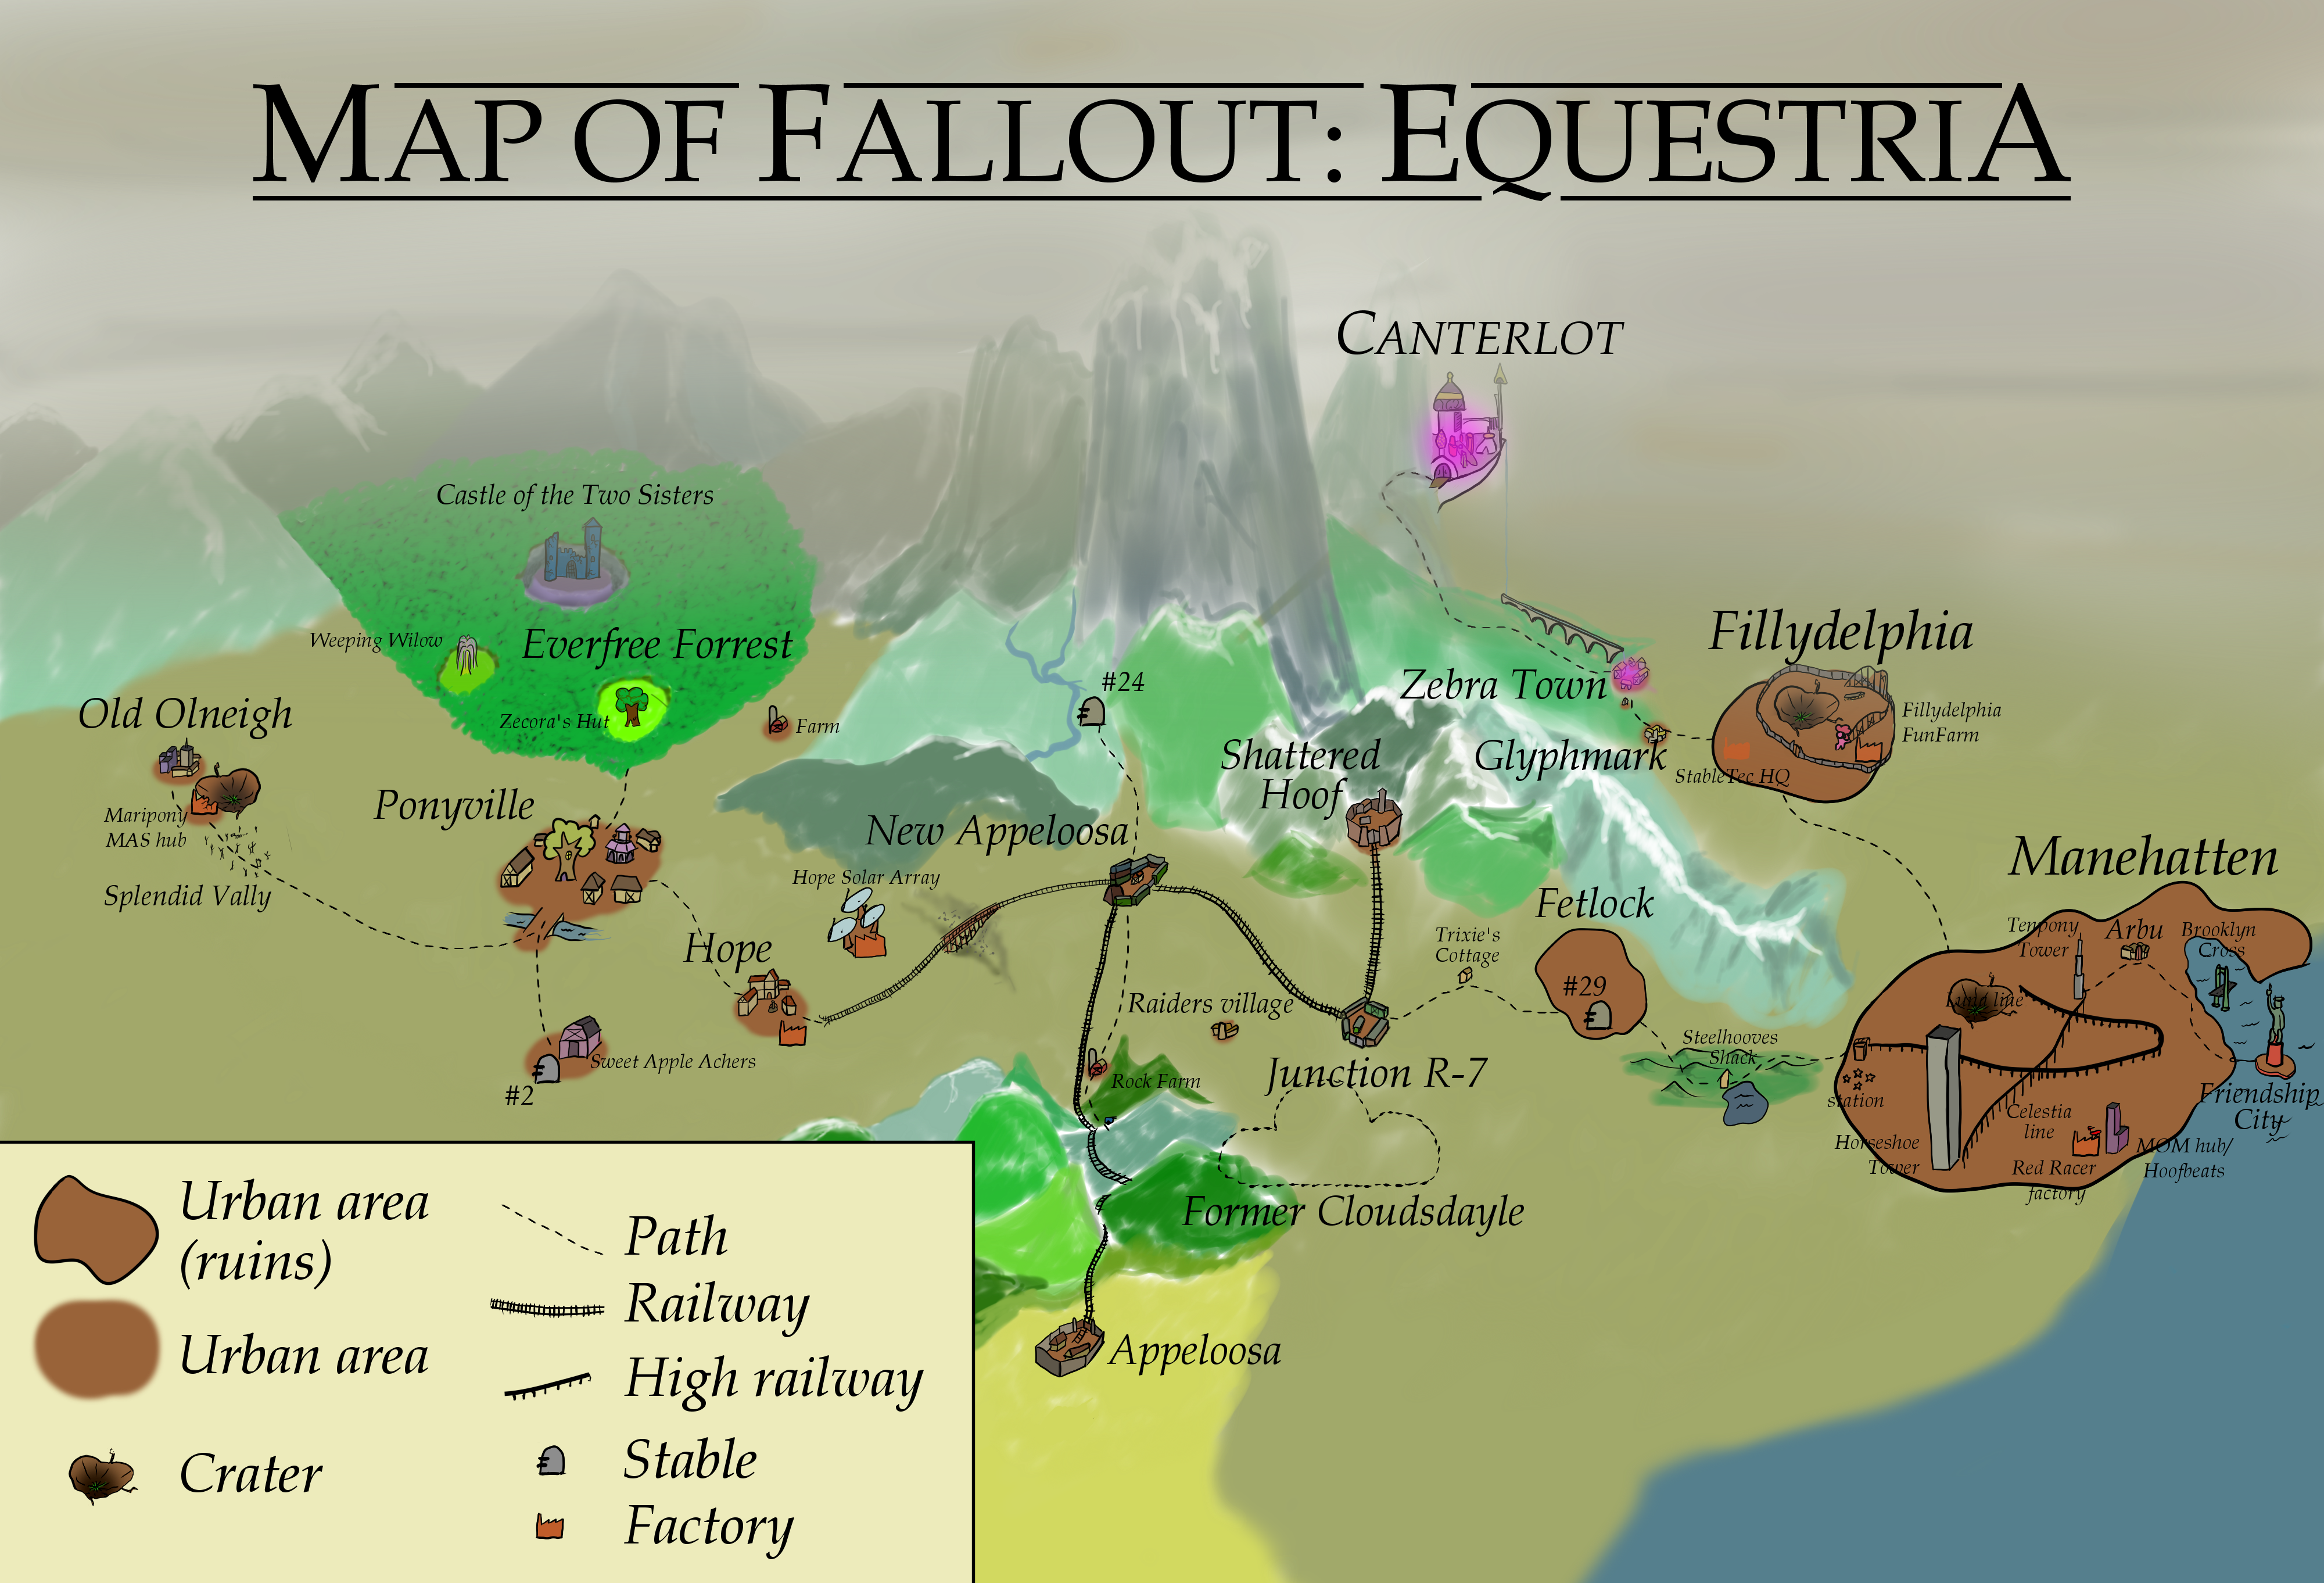 Fallout Equestria Full MAP By Pete Bagheera On DeviantArt.